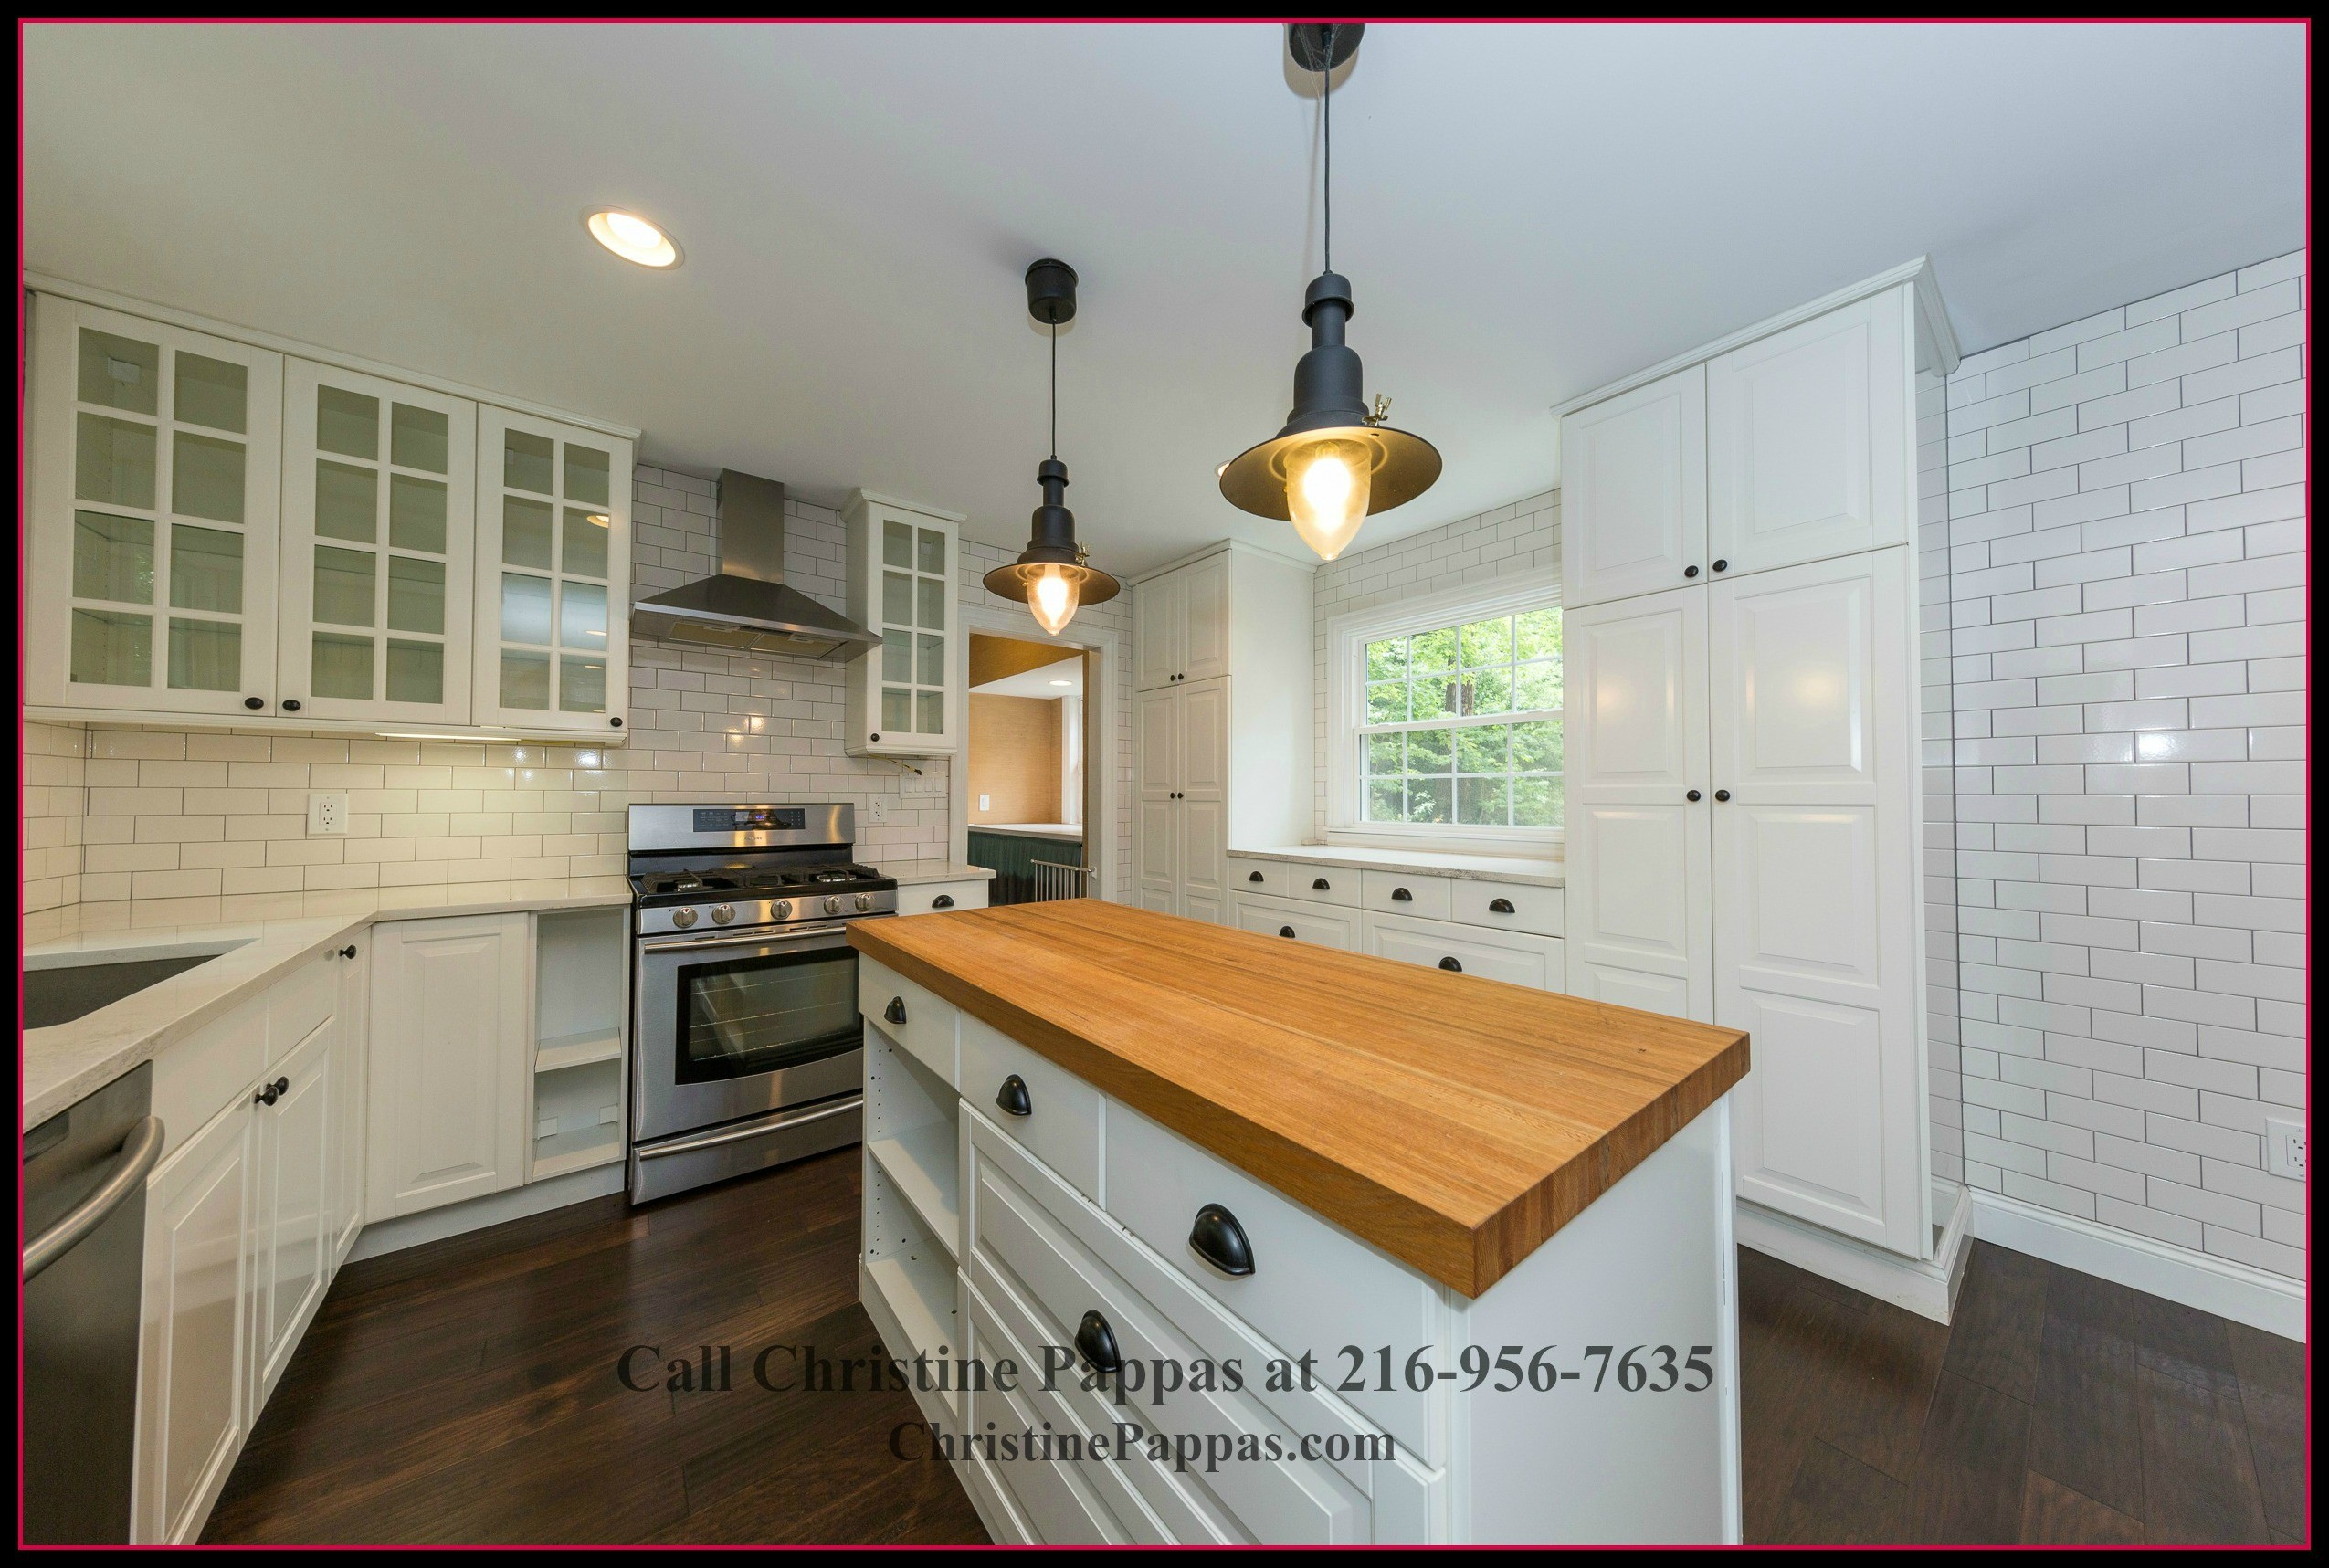 The gourmet kitchen in this strikingly beautiful home for sale in Gates Mills OH features center island and built in cabinets that add up to the elegance of the interiors.